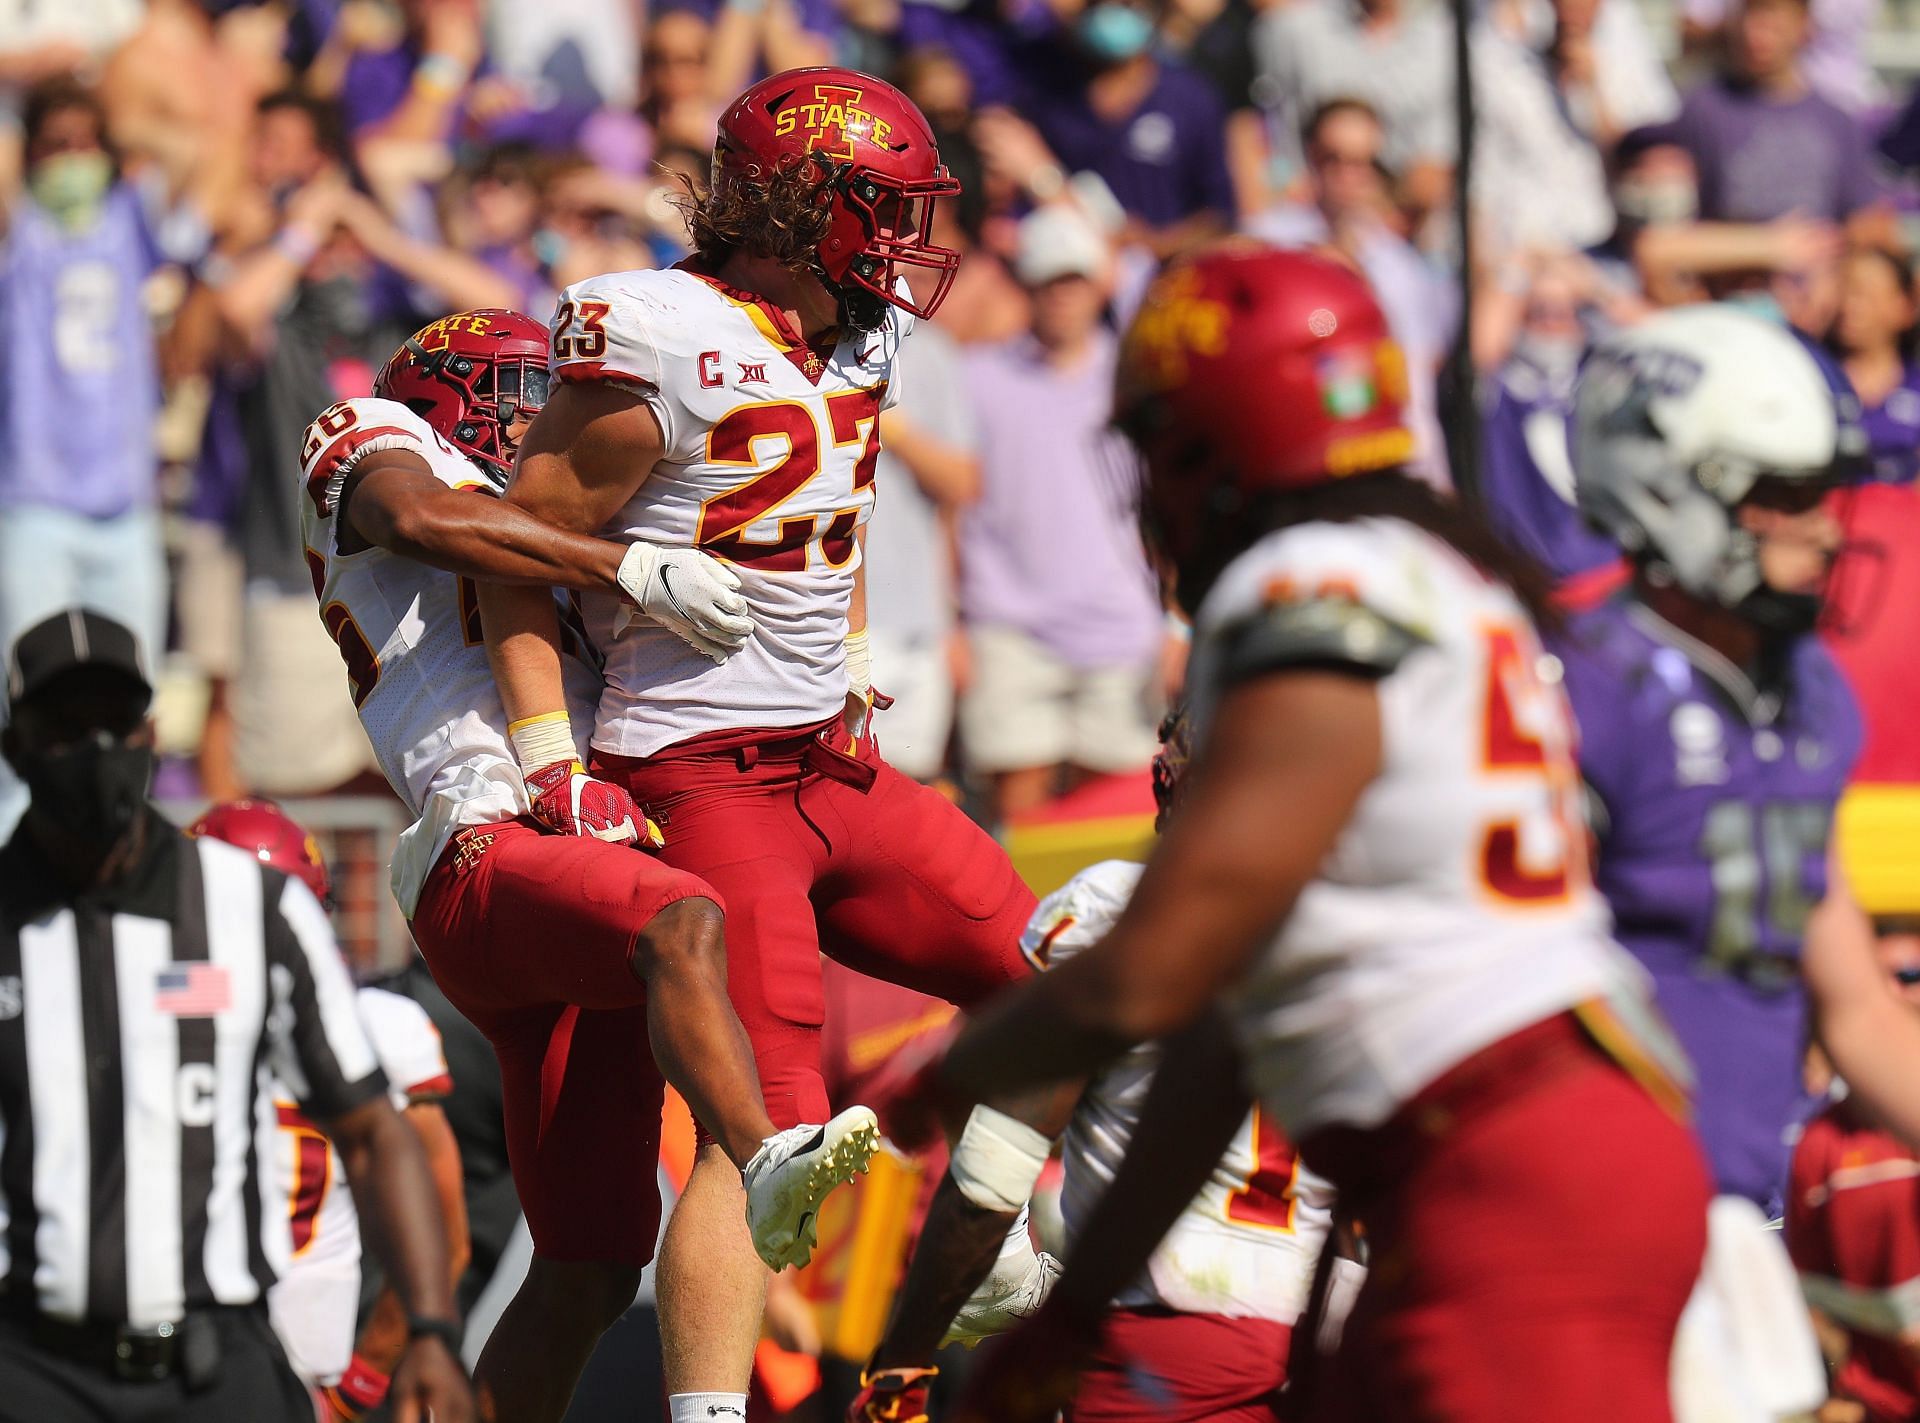 Anthony Johnson Jr. #26 and Mike Rose #23 of the Iowa State Cyclones celebrate a fourth quarter interception against the TCU Horned Frogs